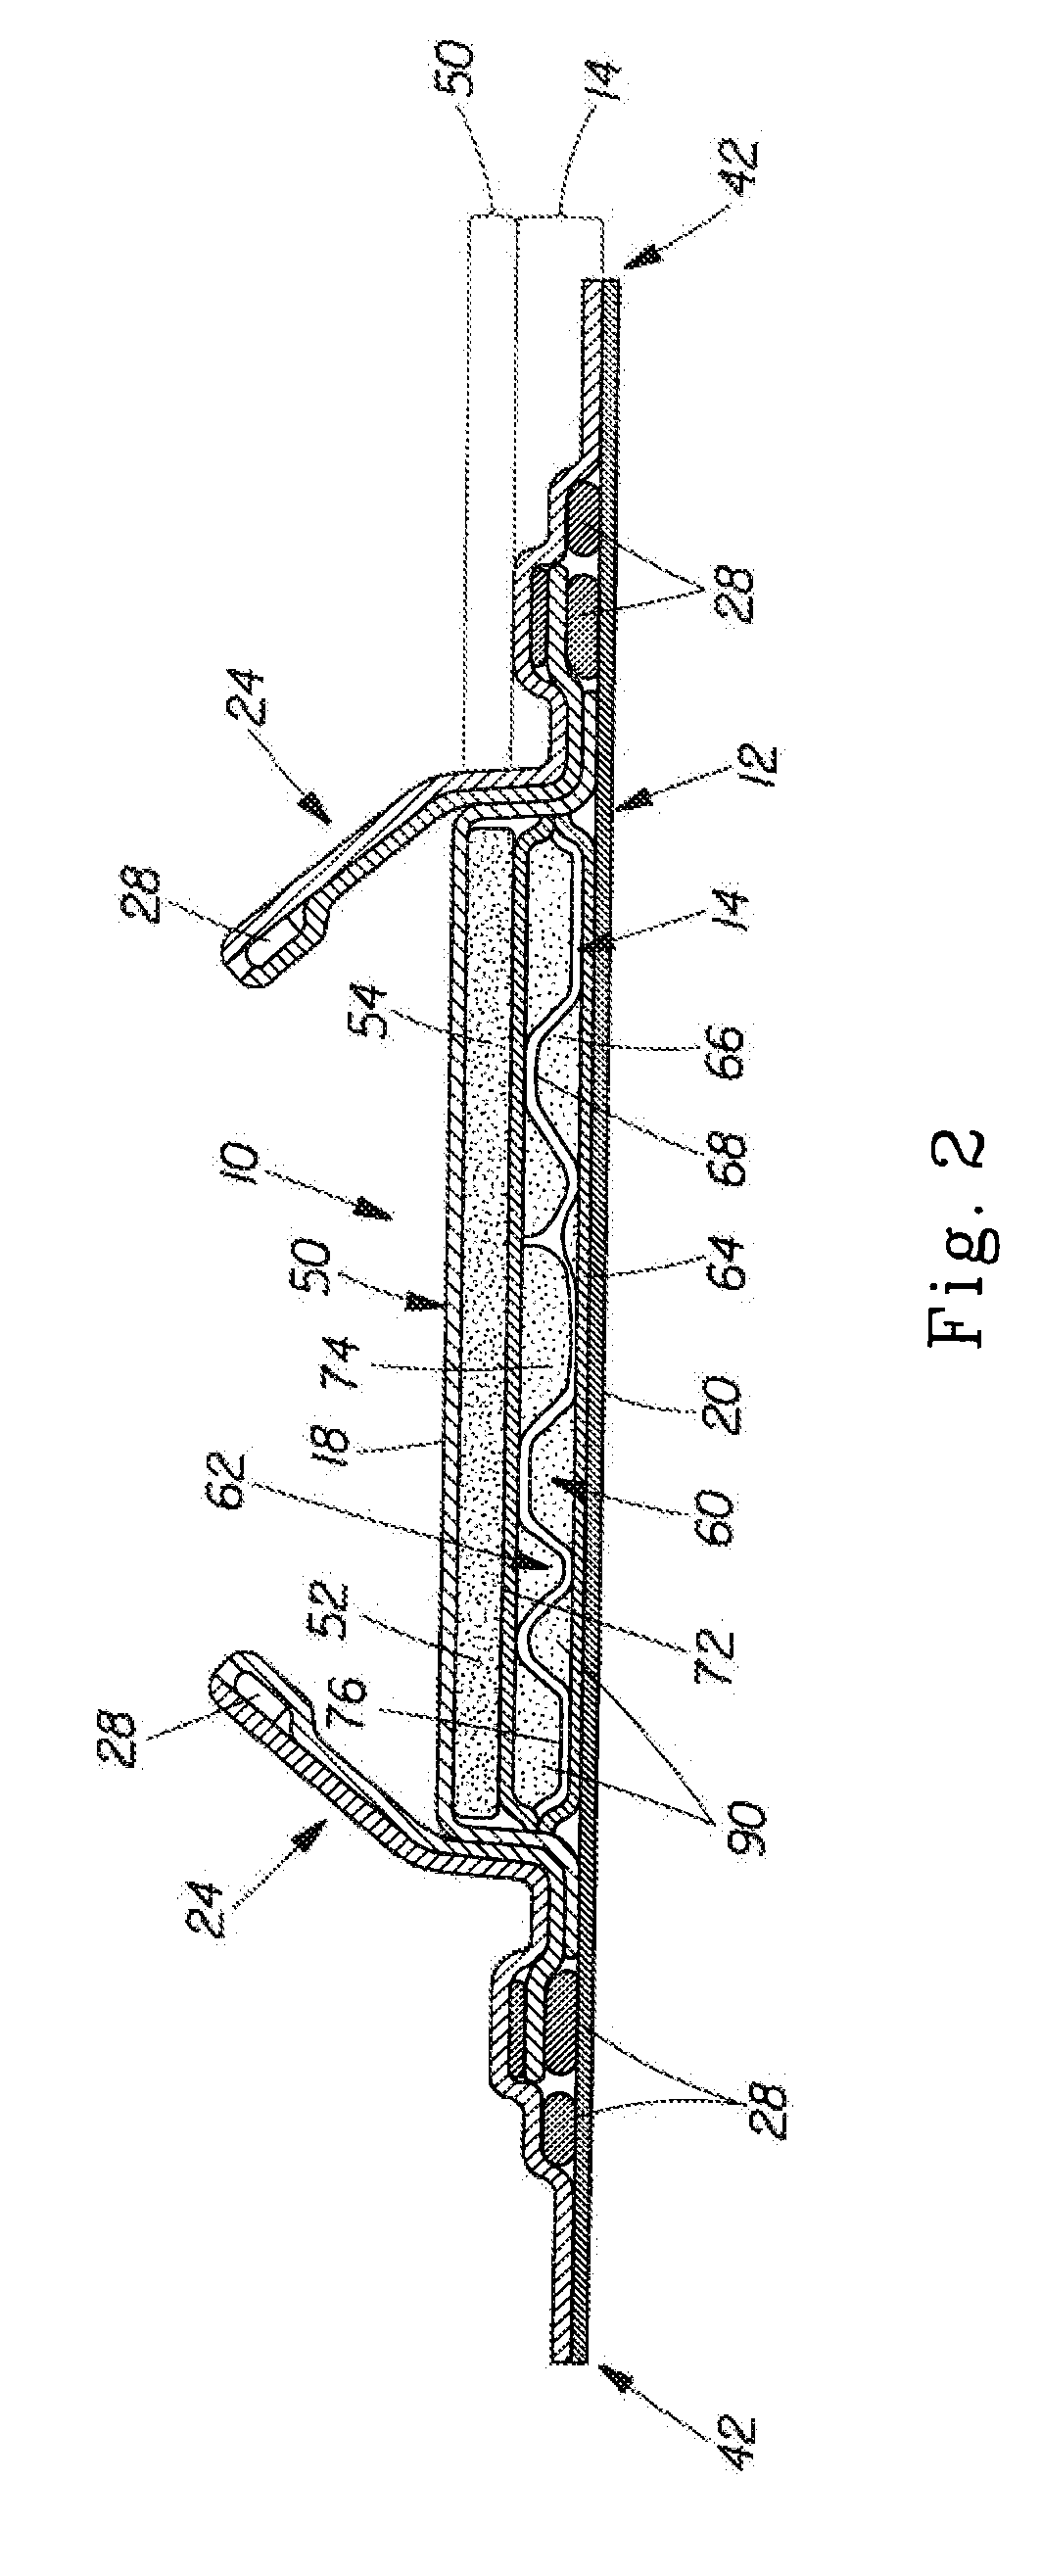 Better Fitting Disposable Absorbent Article With Substantially Continuously Distributed Absorbent Particulate Polymer Material